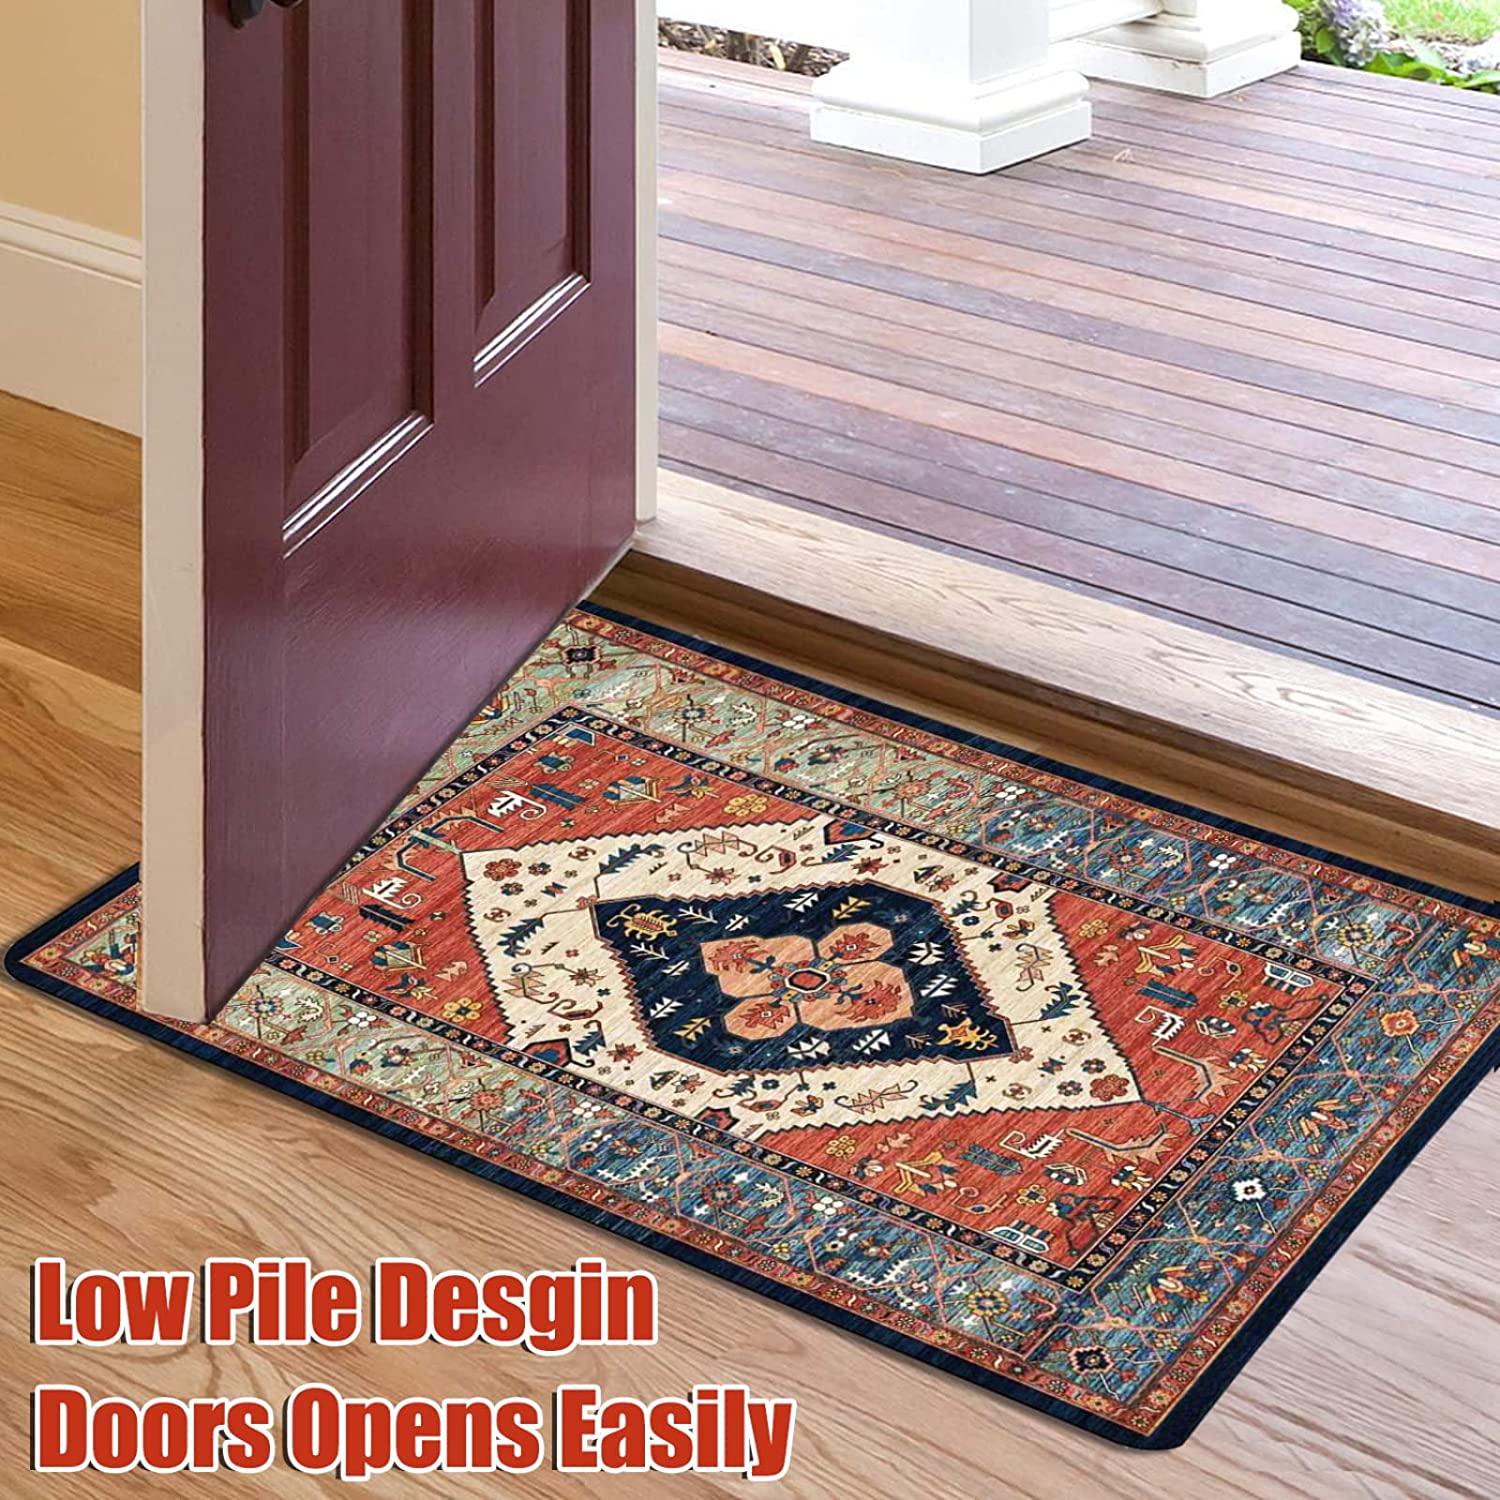 safarsa Kitchen Mats for Floor Set of 2 Pieces Kitchen Rugs and Mats Non  Skid Washable Kitchen Floor Mat(17 Wx30 L+17 Wx 47 L Boho Flowers) 